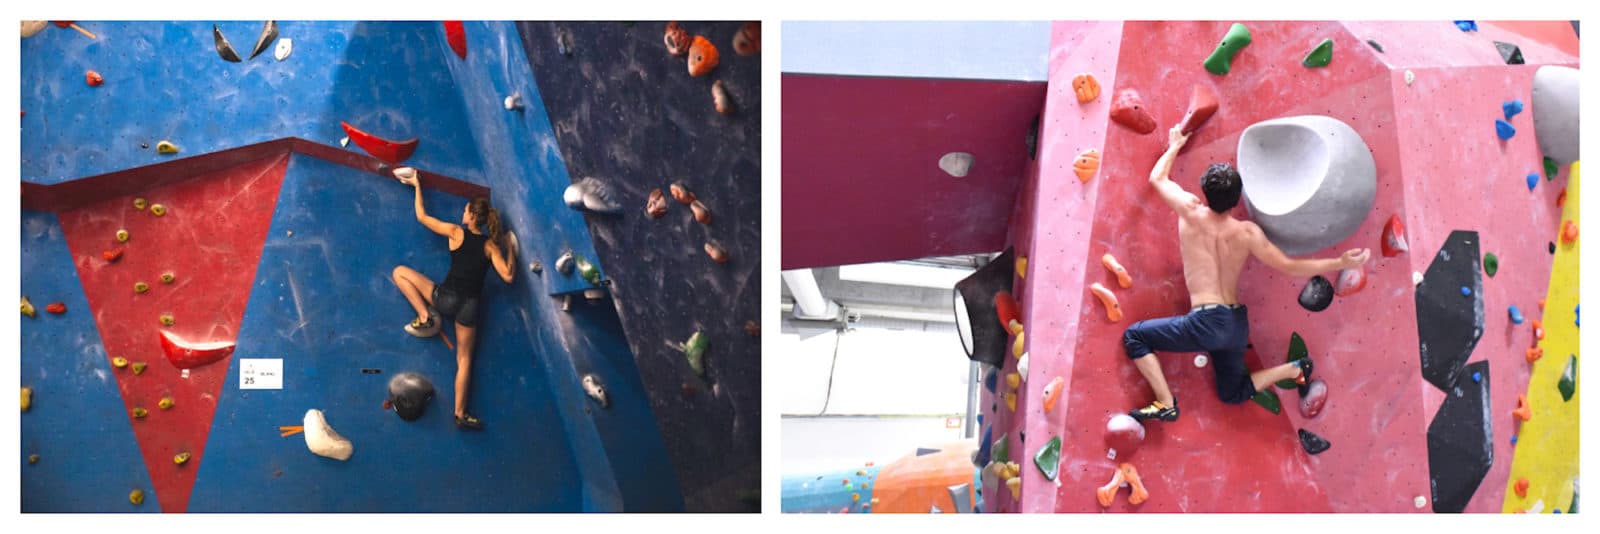 The blue (left) and pink (right) climbing walls at Blockout, a Paris kid-friendly climbing club that organizes children’s birthday parties.